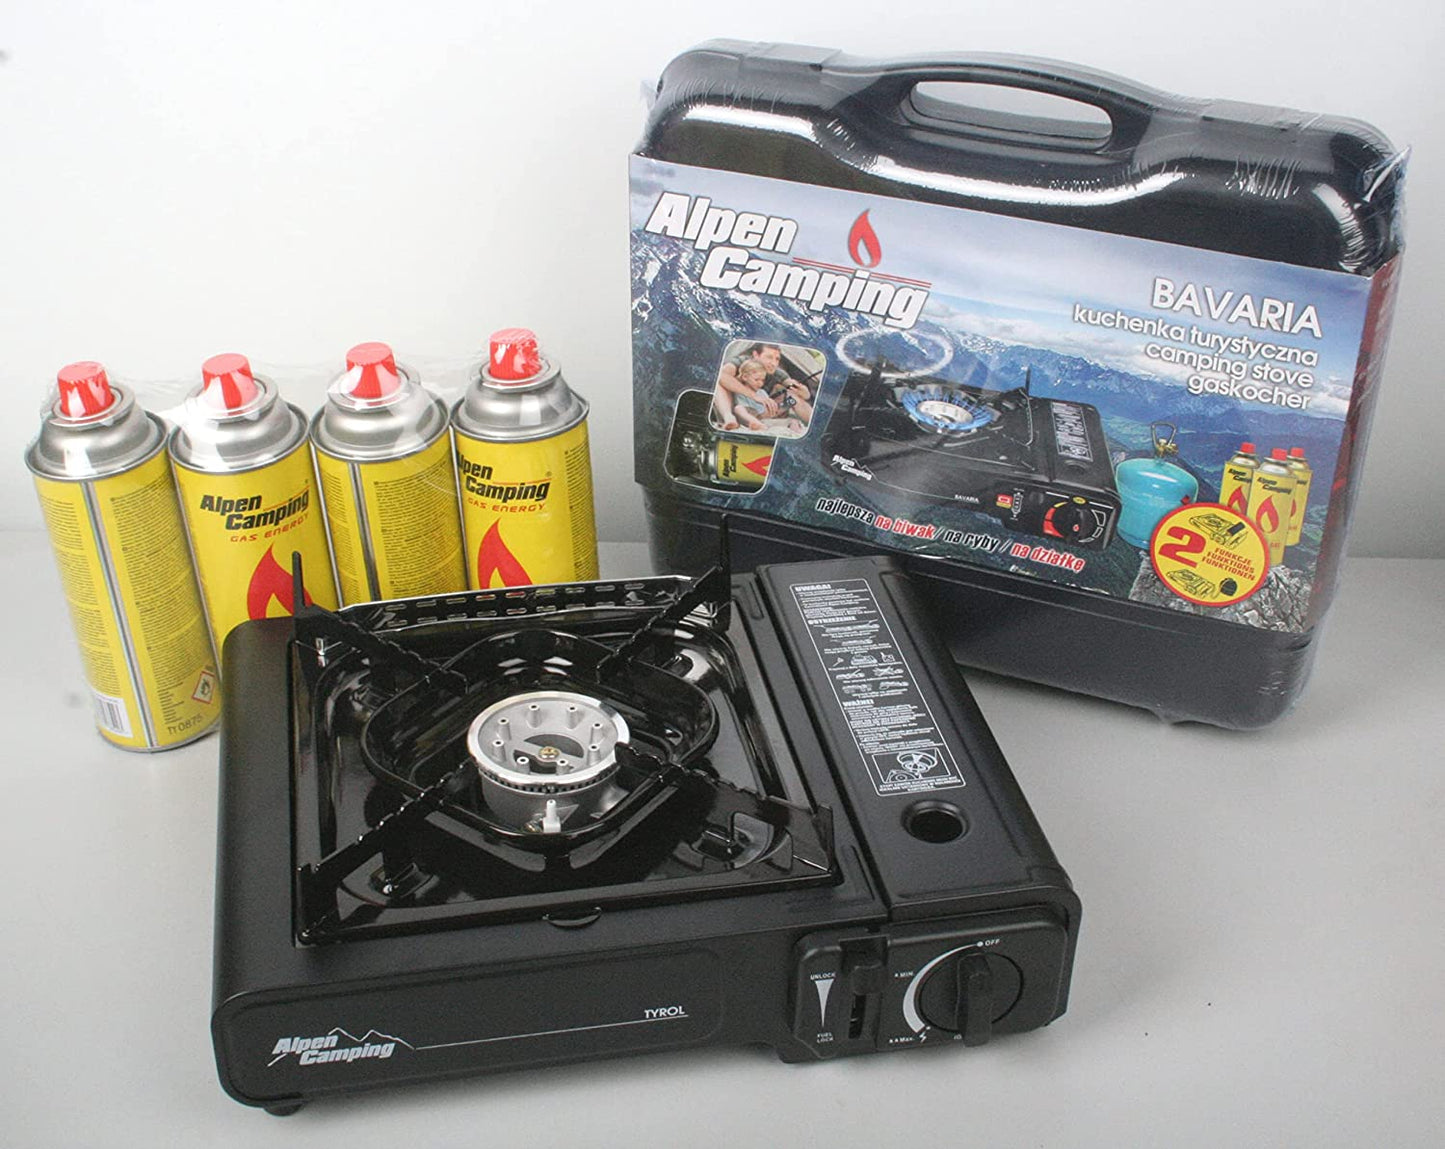 Premium gas cooker, camping cooker for outdoor use